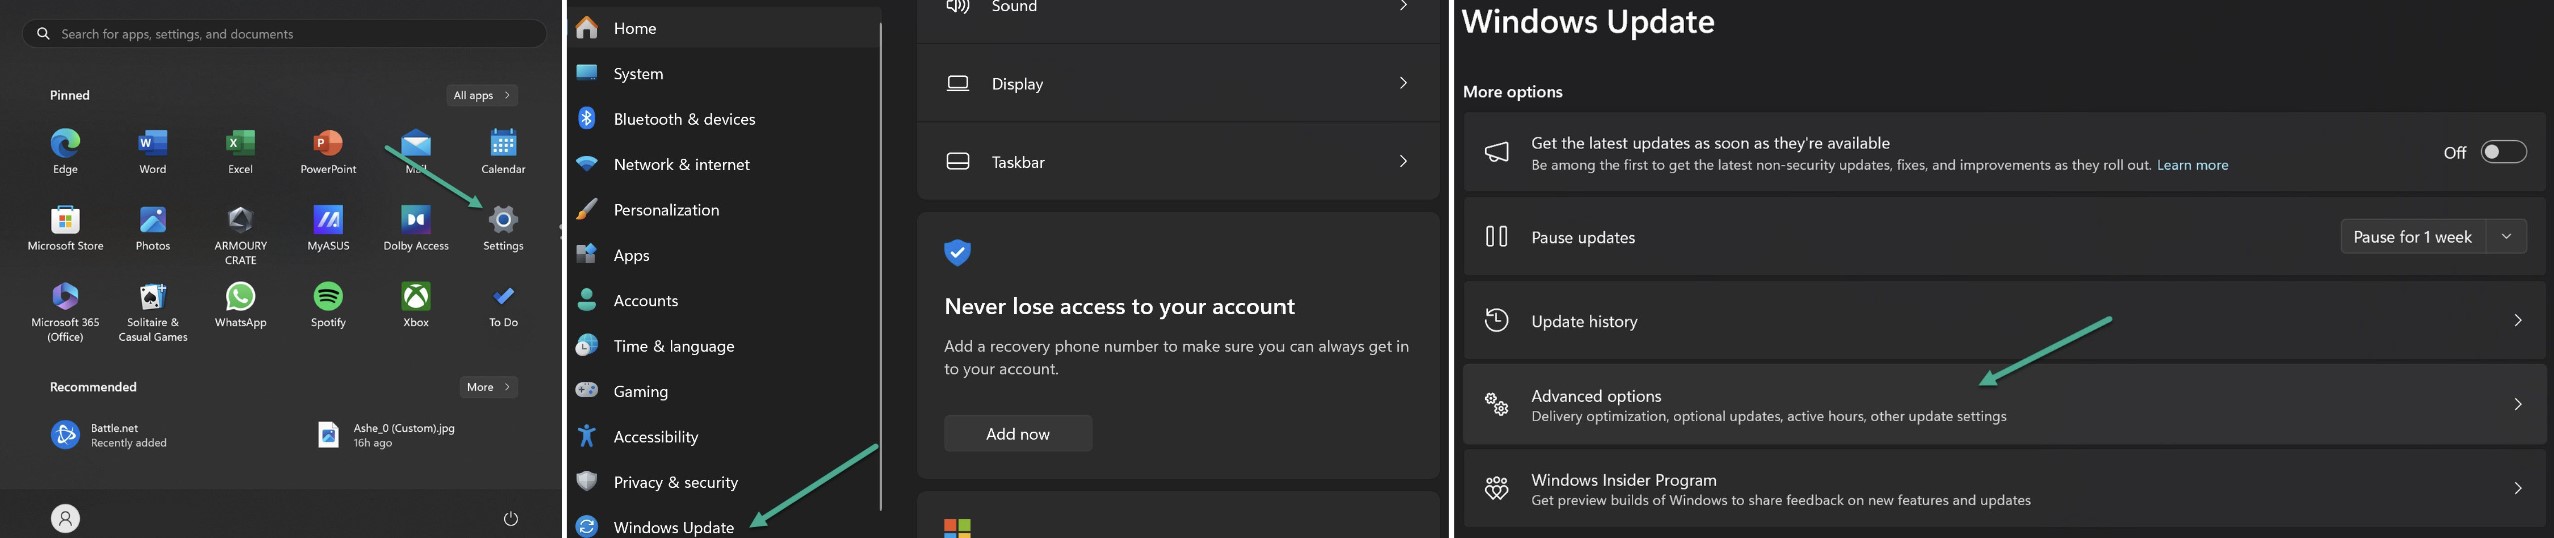 Microsoft Store Slow Download? 10 Fixes That Work (Reset, Increase Bandwidth + More) 2